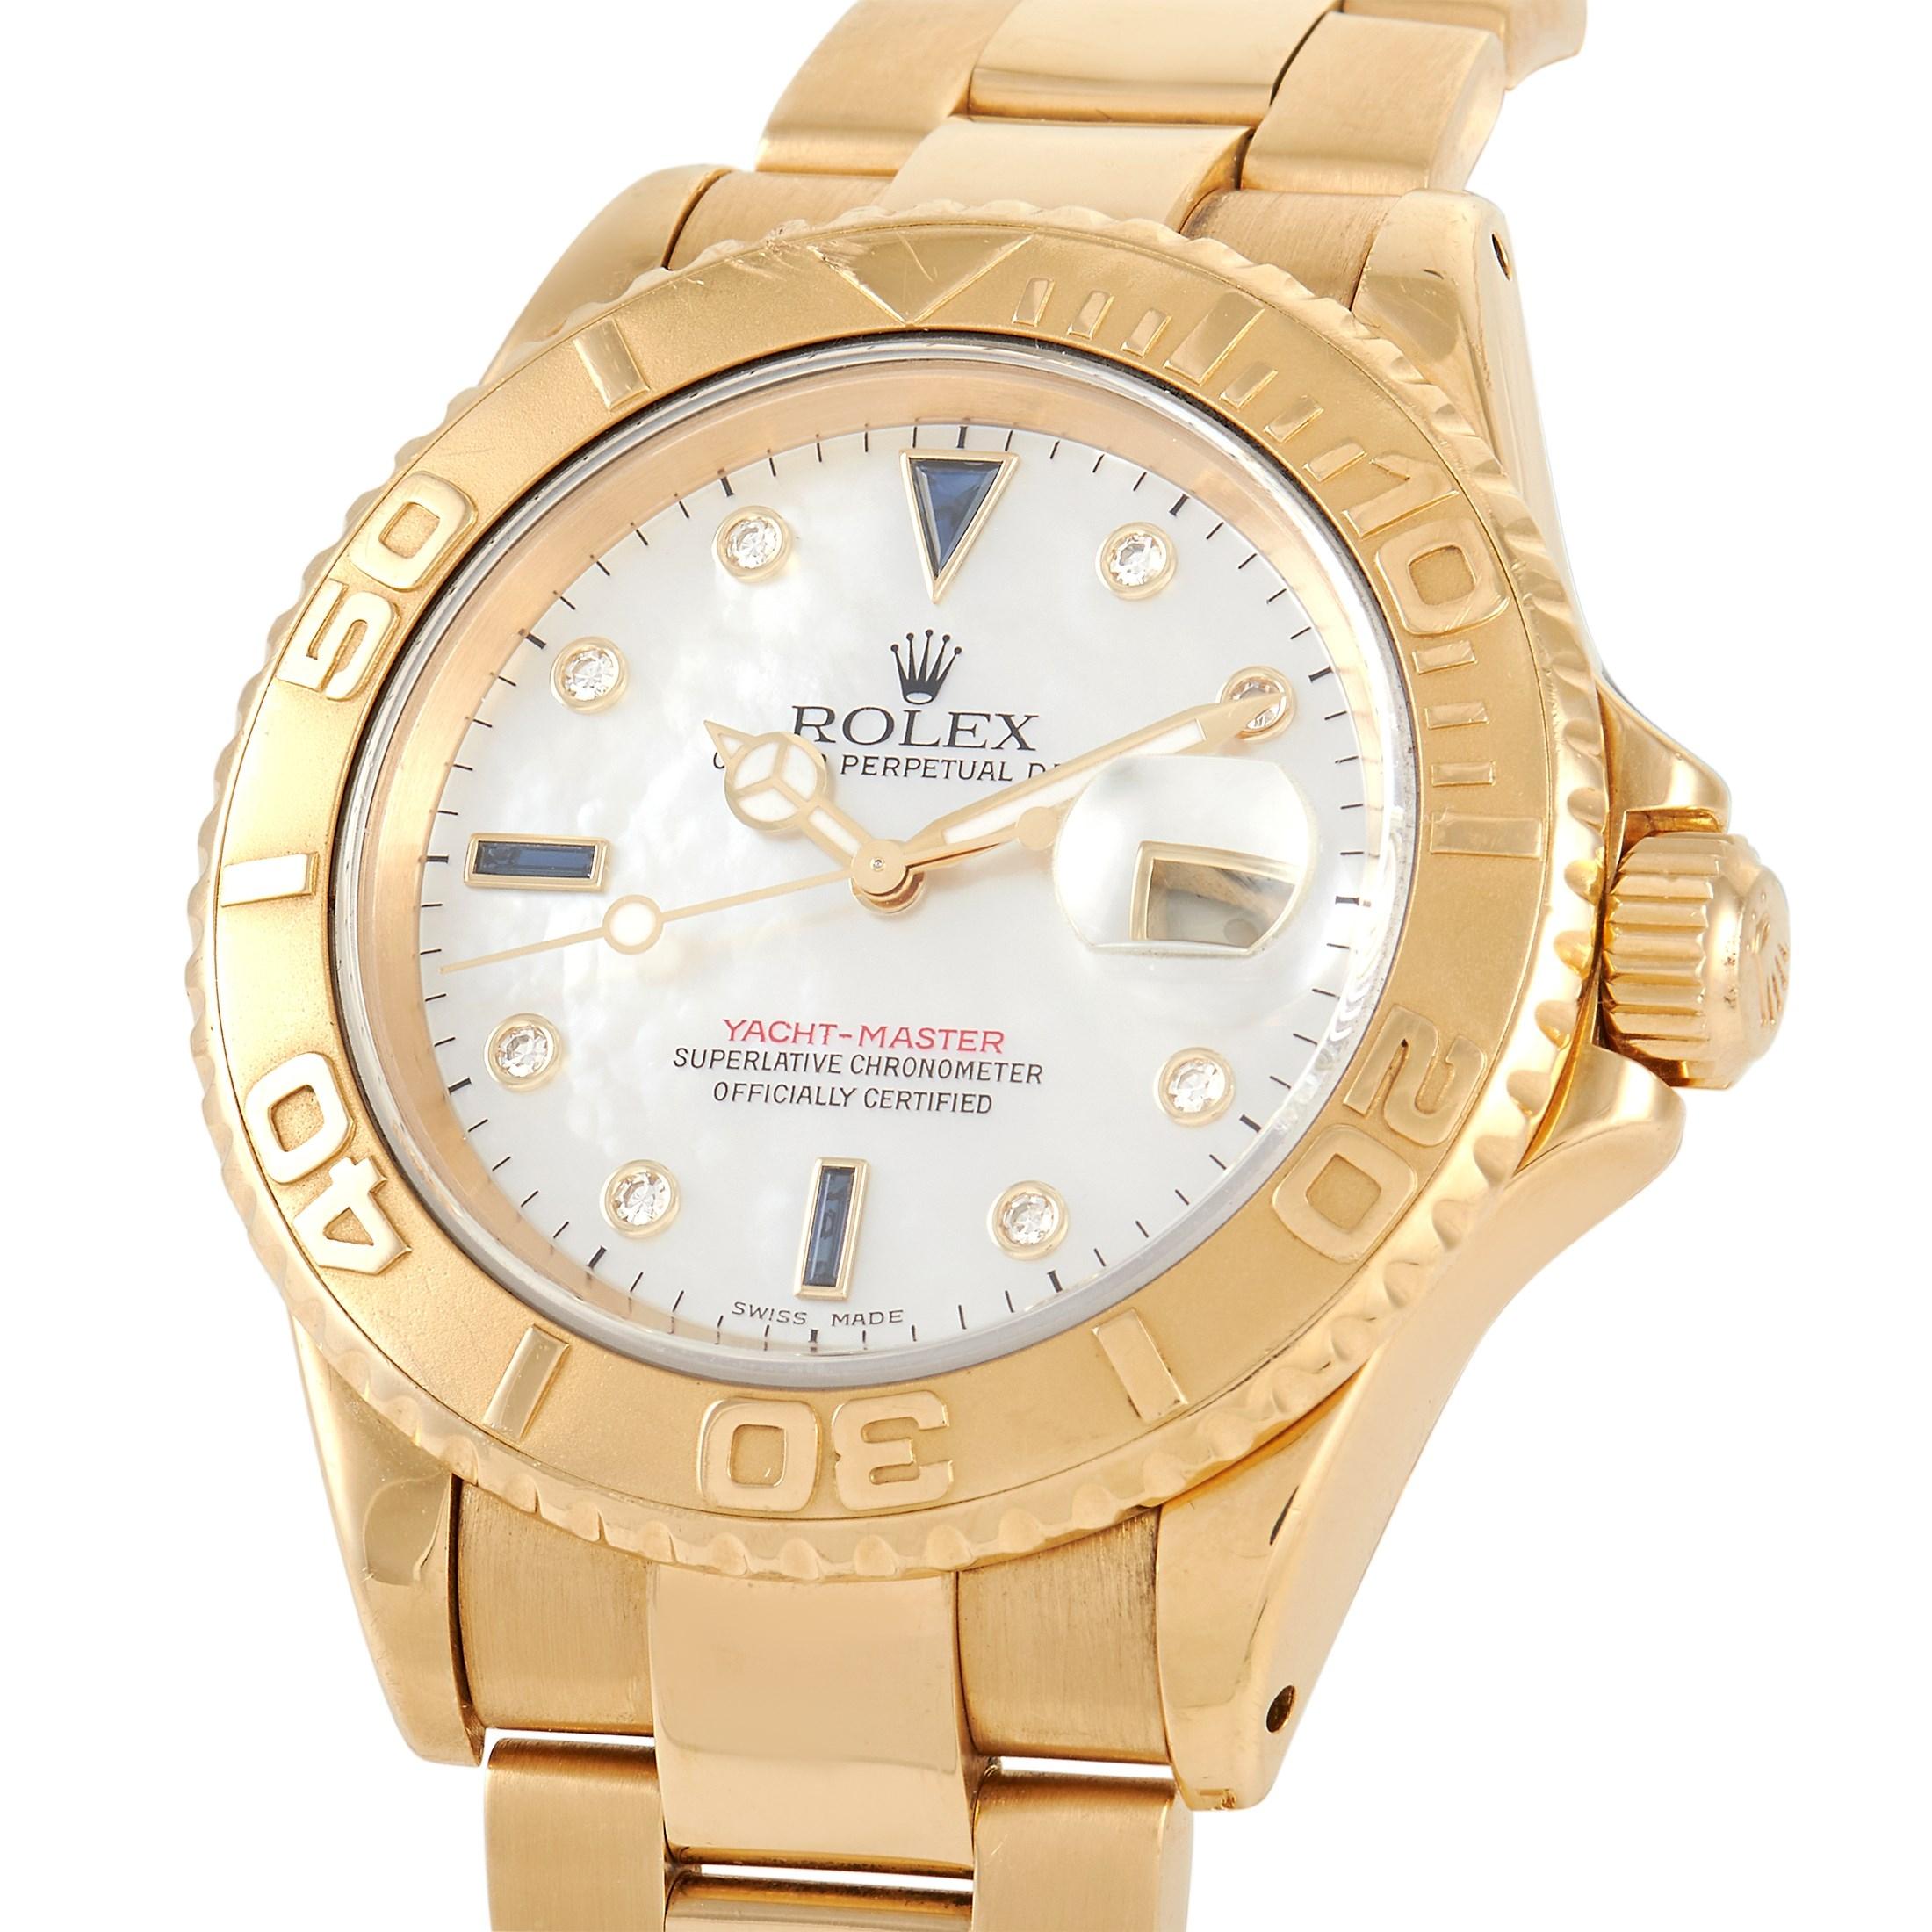 Produced in 1991 but released in 1992, this 18K yellow gold Rolex Yacht-Master 16628 is powered by a reliable caliber 3135 movement with 31 jewels and 50-hour power reserve. At 40mm, this timepiece sits comfortably on the wrist given its solid